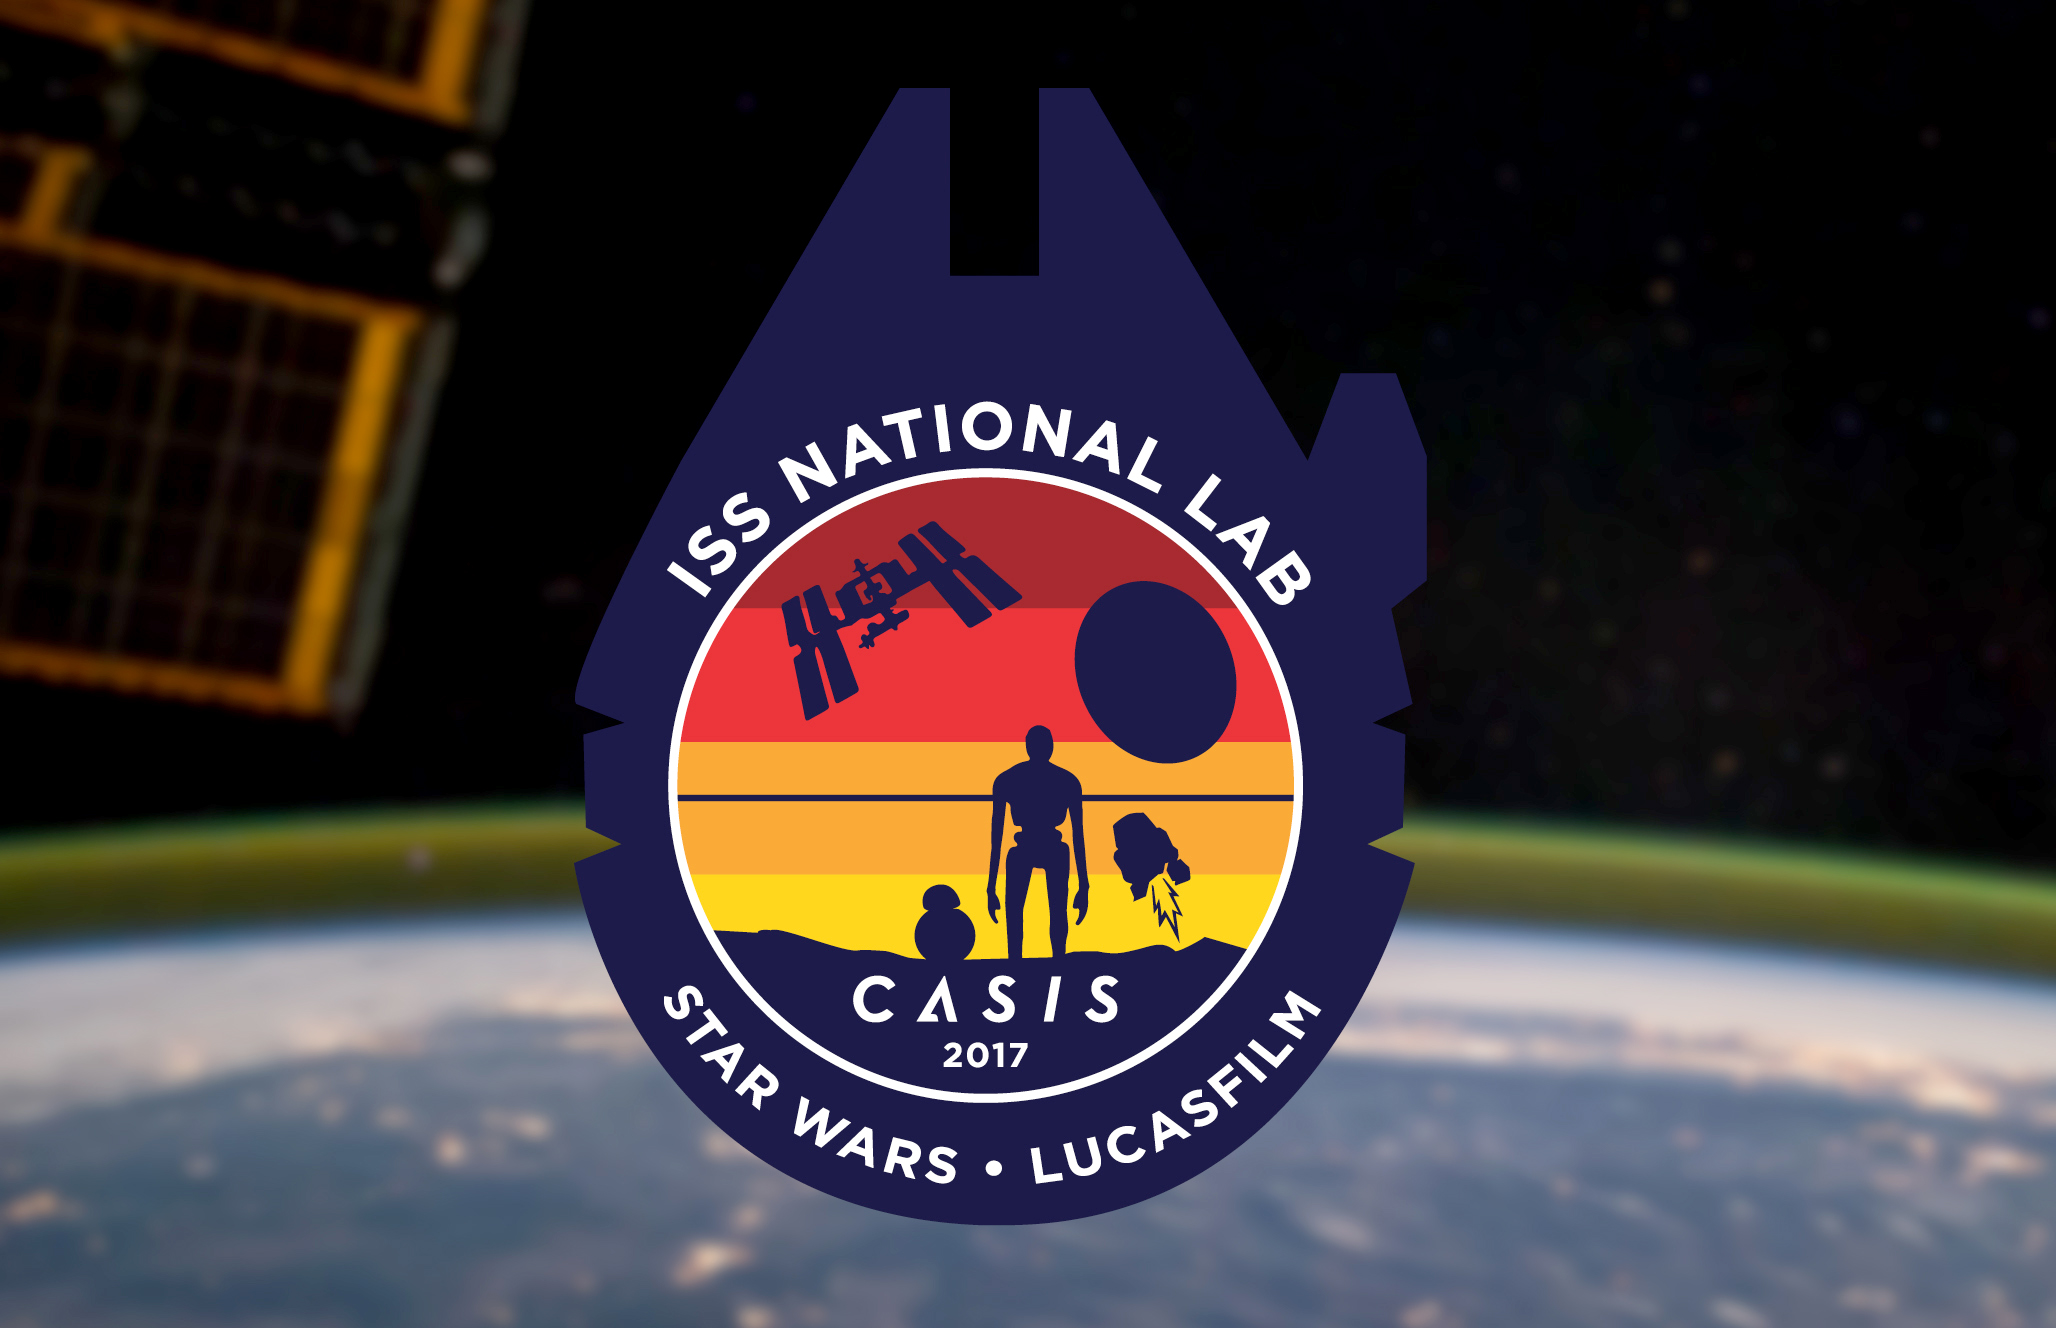 PHOTO: LucasFilm and NASA have teamed up to create an International Space Station mission patch.